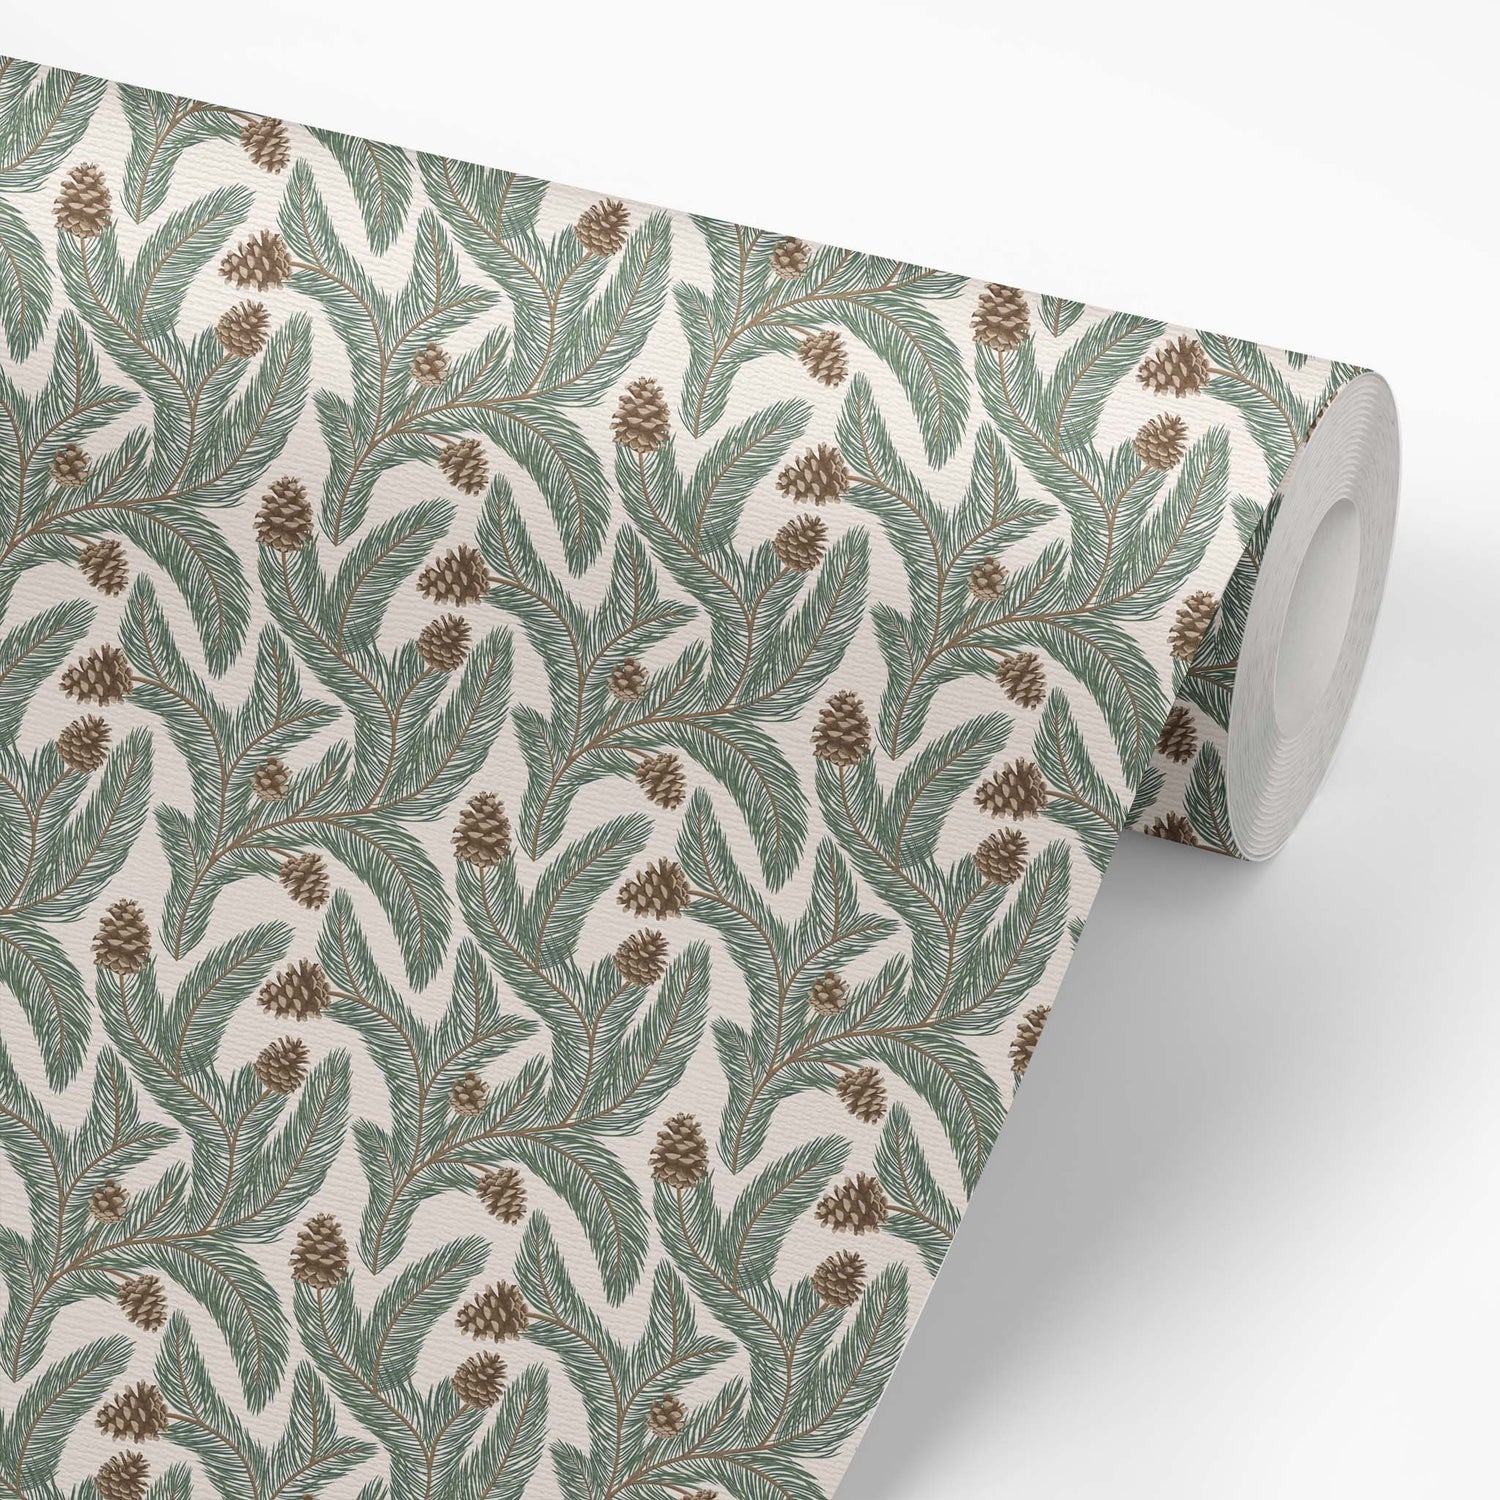 Wallpaper panel featuring Cayla Naylor Sitka- Snow Peel and Stick Wallpaper - a nature inspired pattern